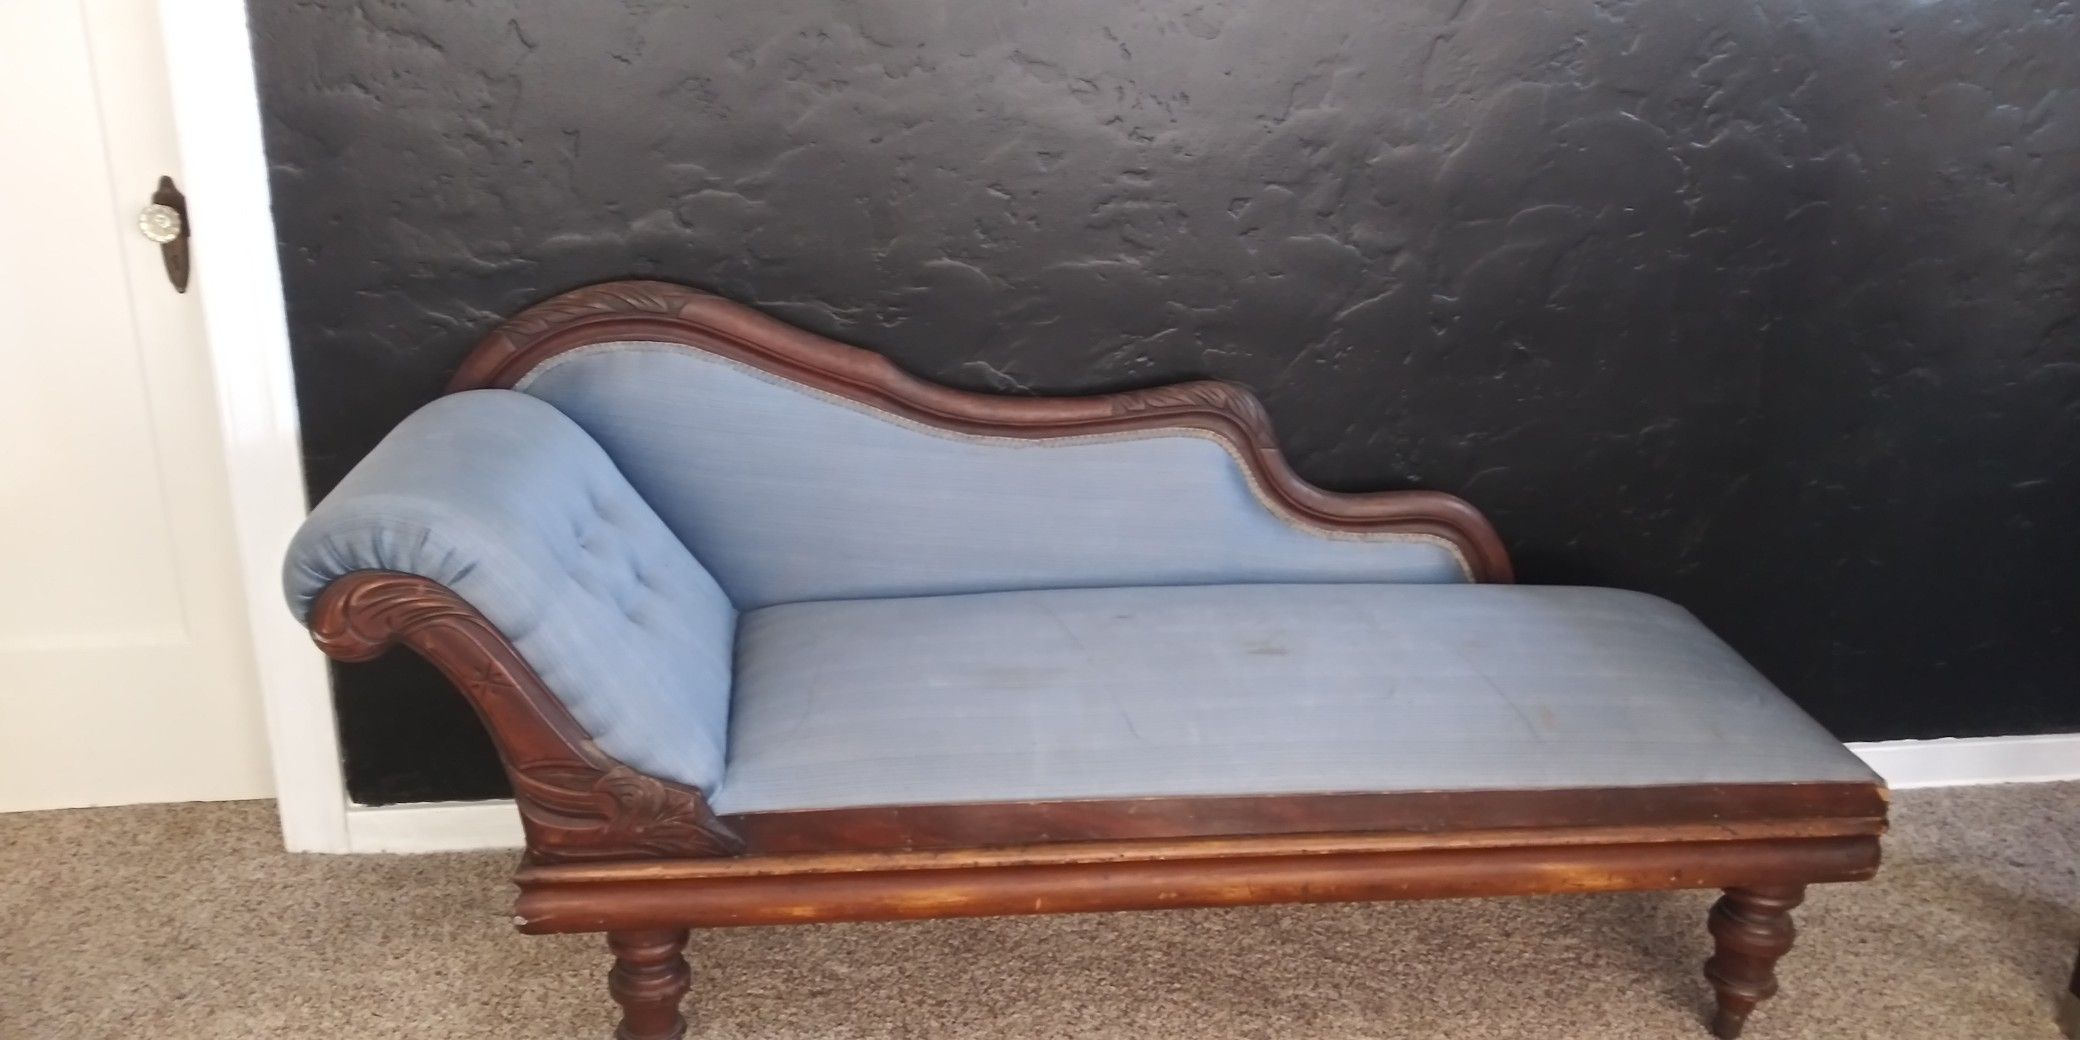 1940s Fainting couch